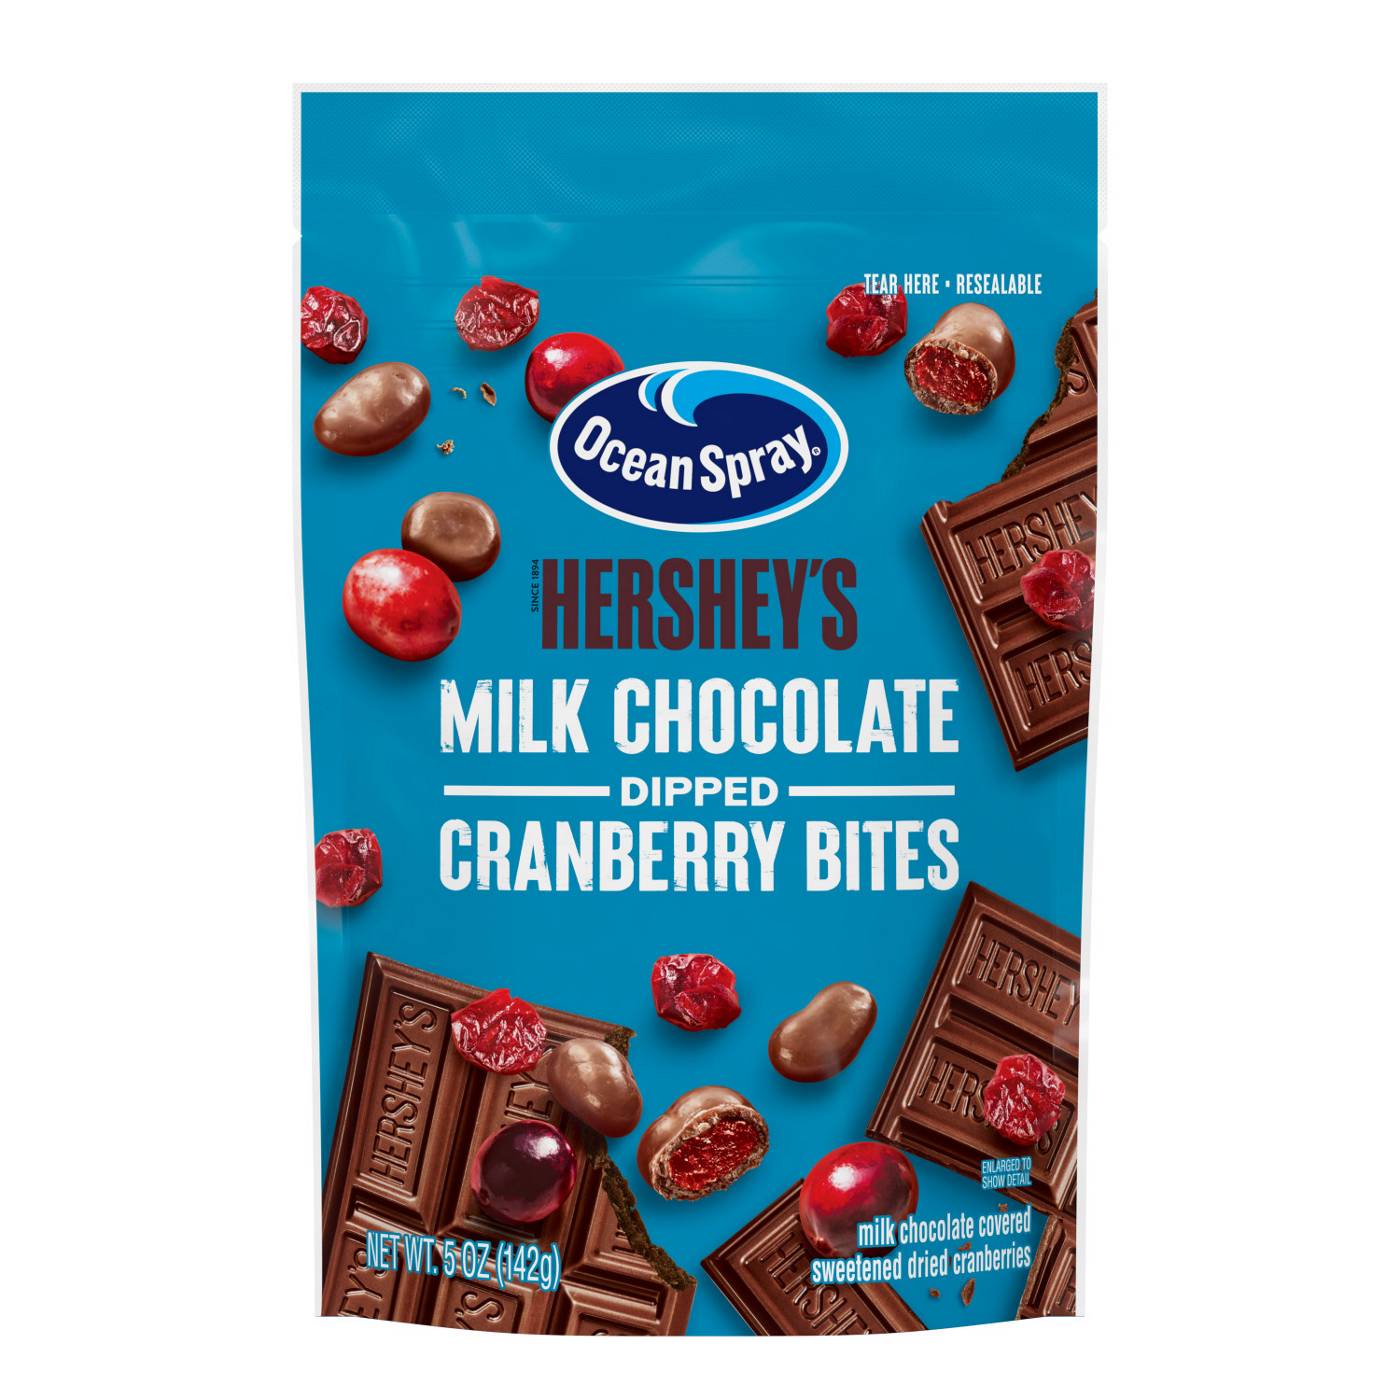 Ocean Spray Ocean Spray® HERSHEY’S® Milk Chocolate Dipped Cranberry Bites, Chocolate Covered Dried Cranberries, 5 Oz Pouch; image 1 of 7